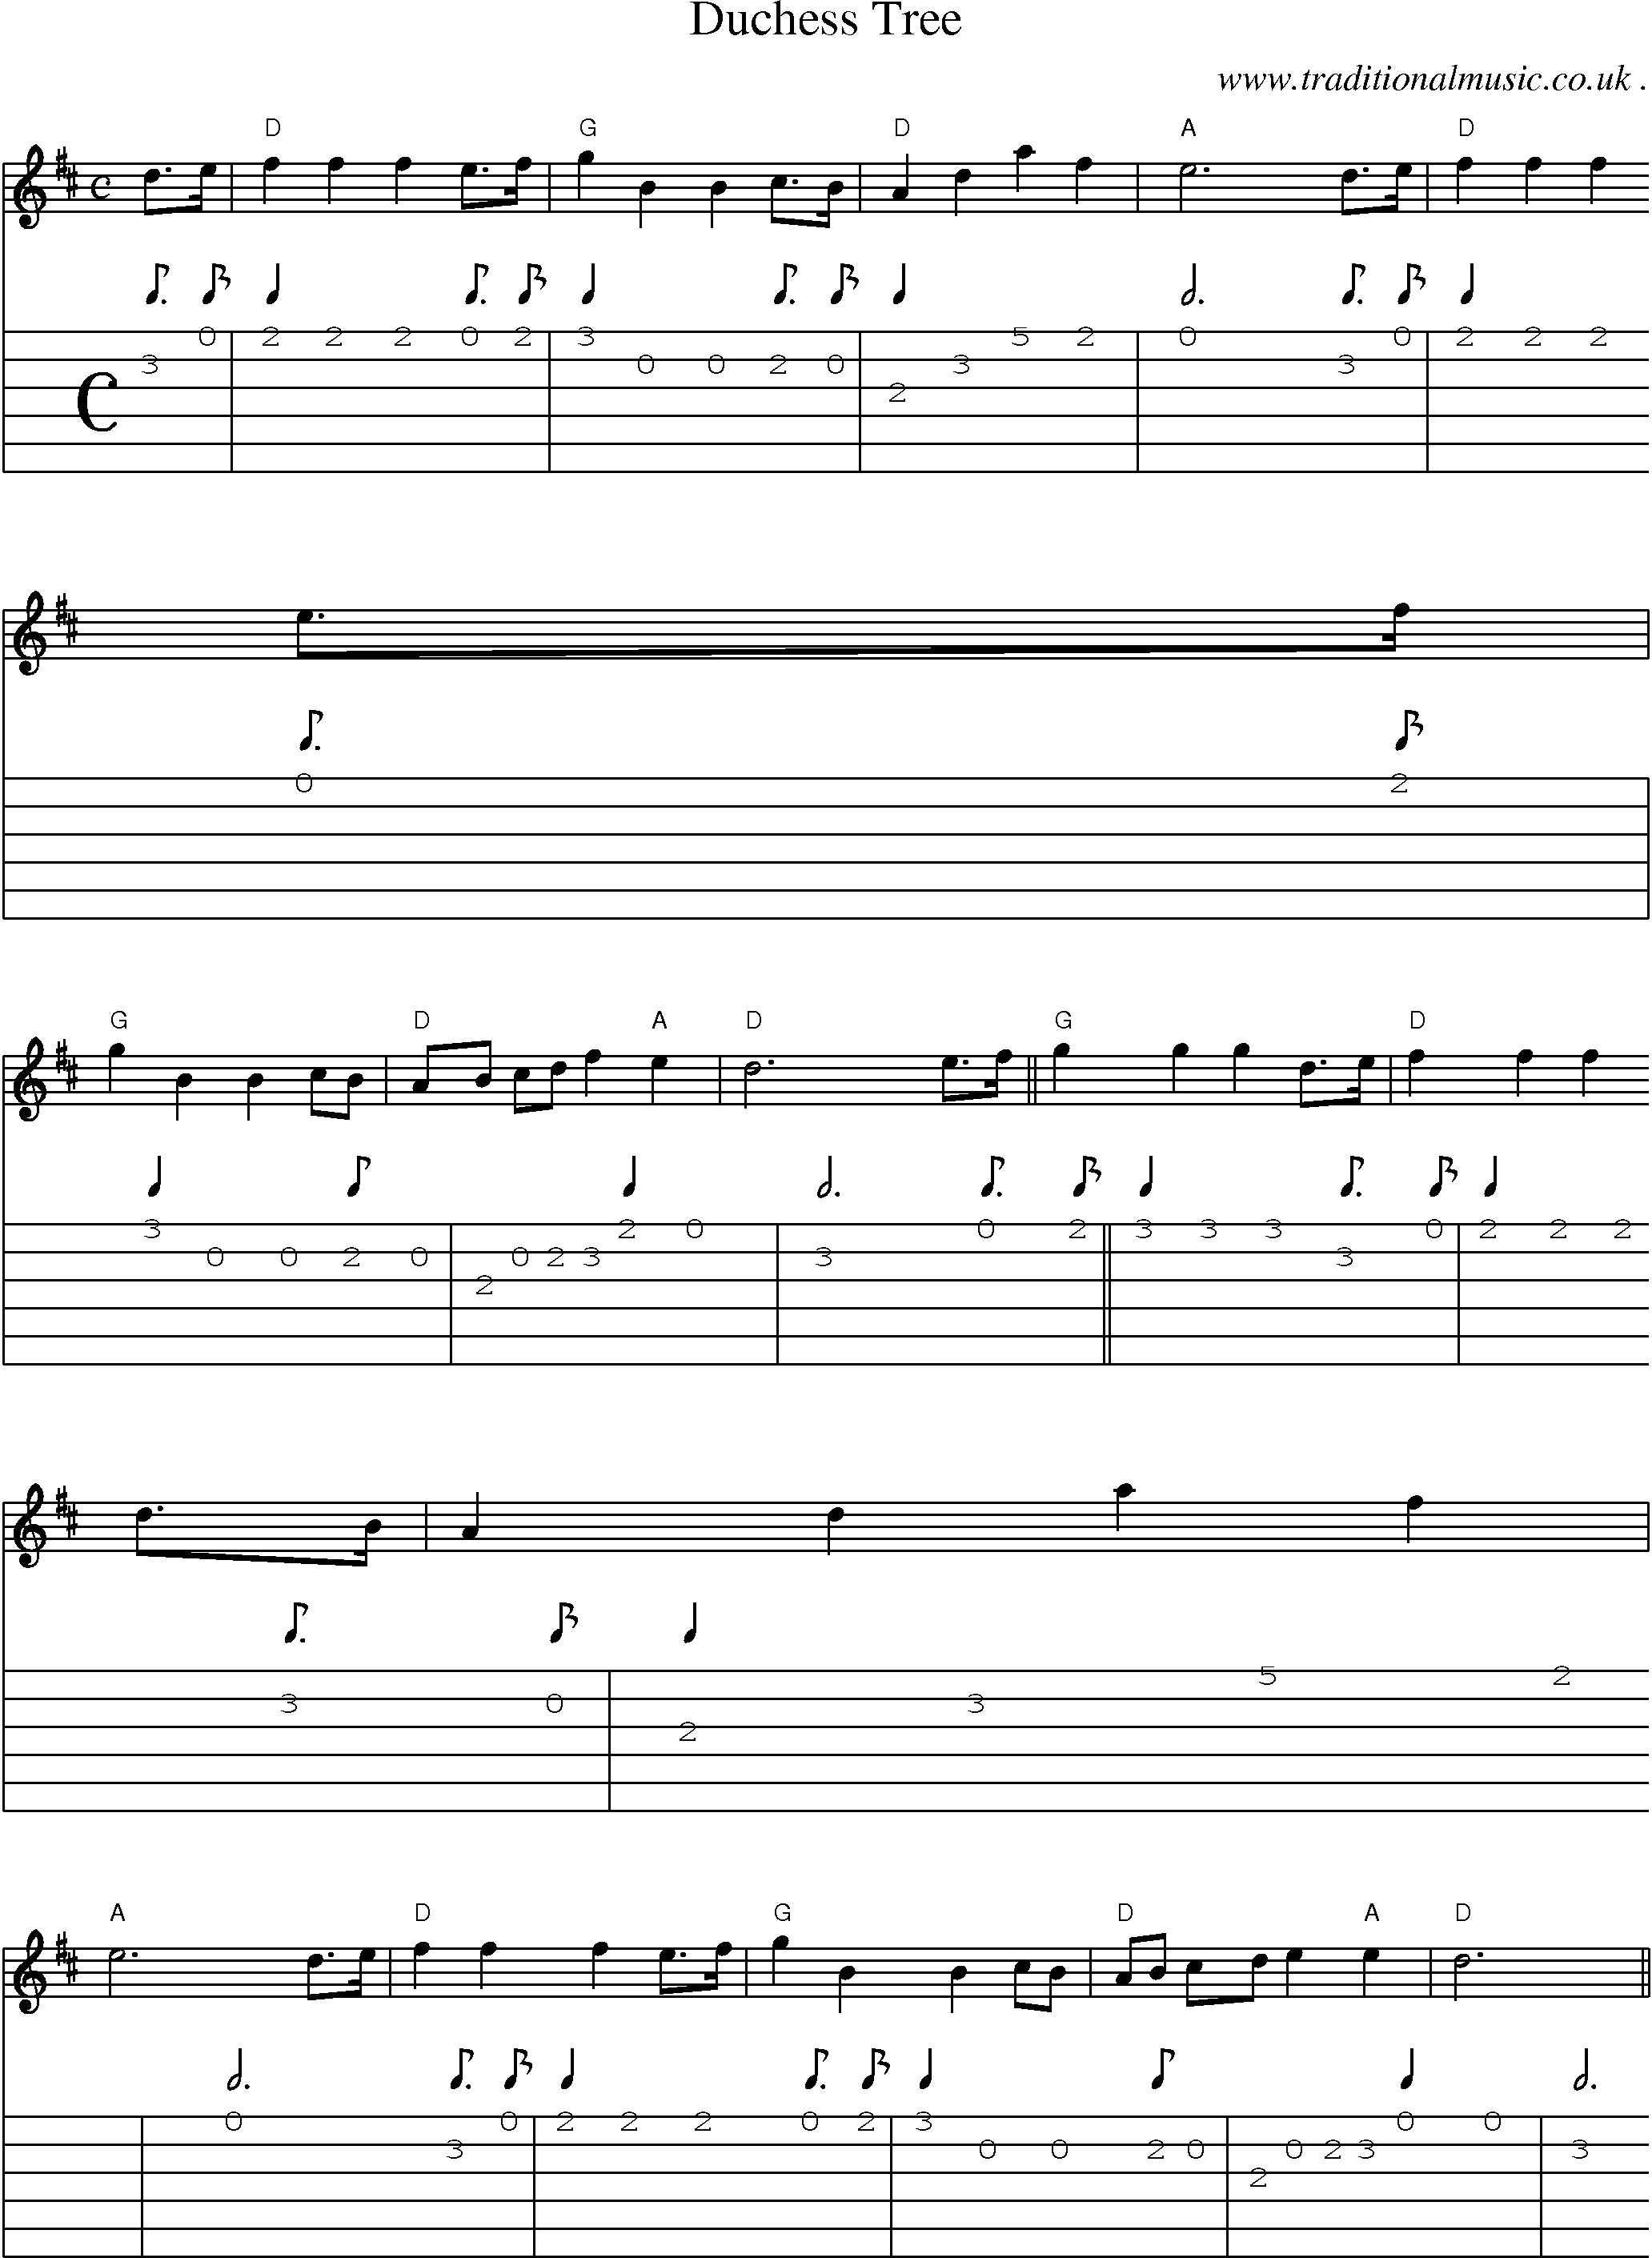 Sheet-music  score, Chords and Guitar Tabs for Duchess Tree